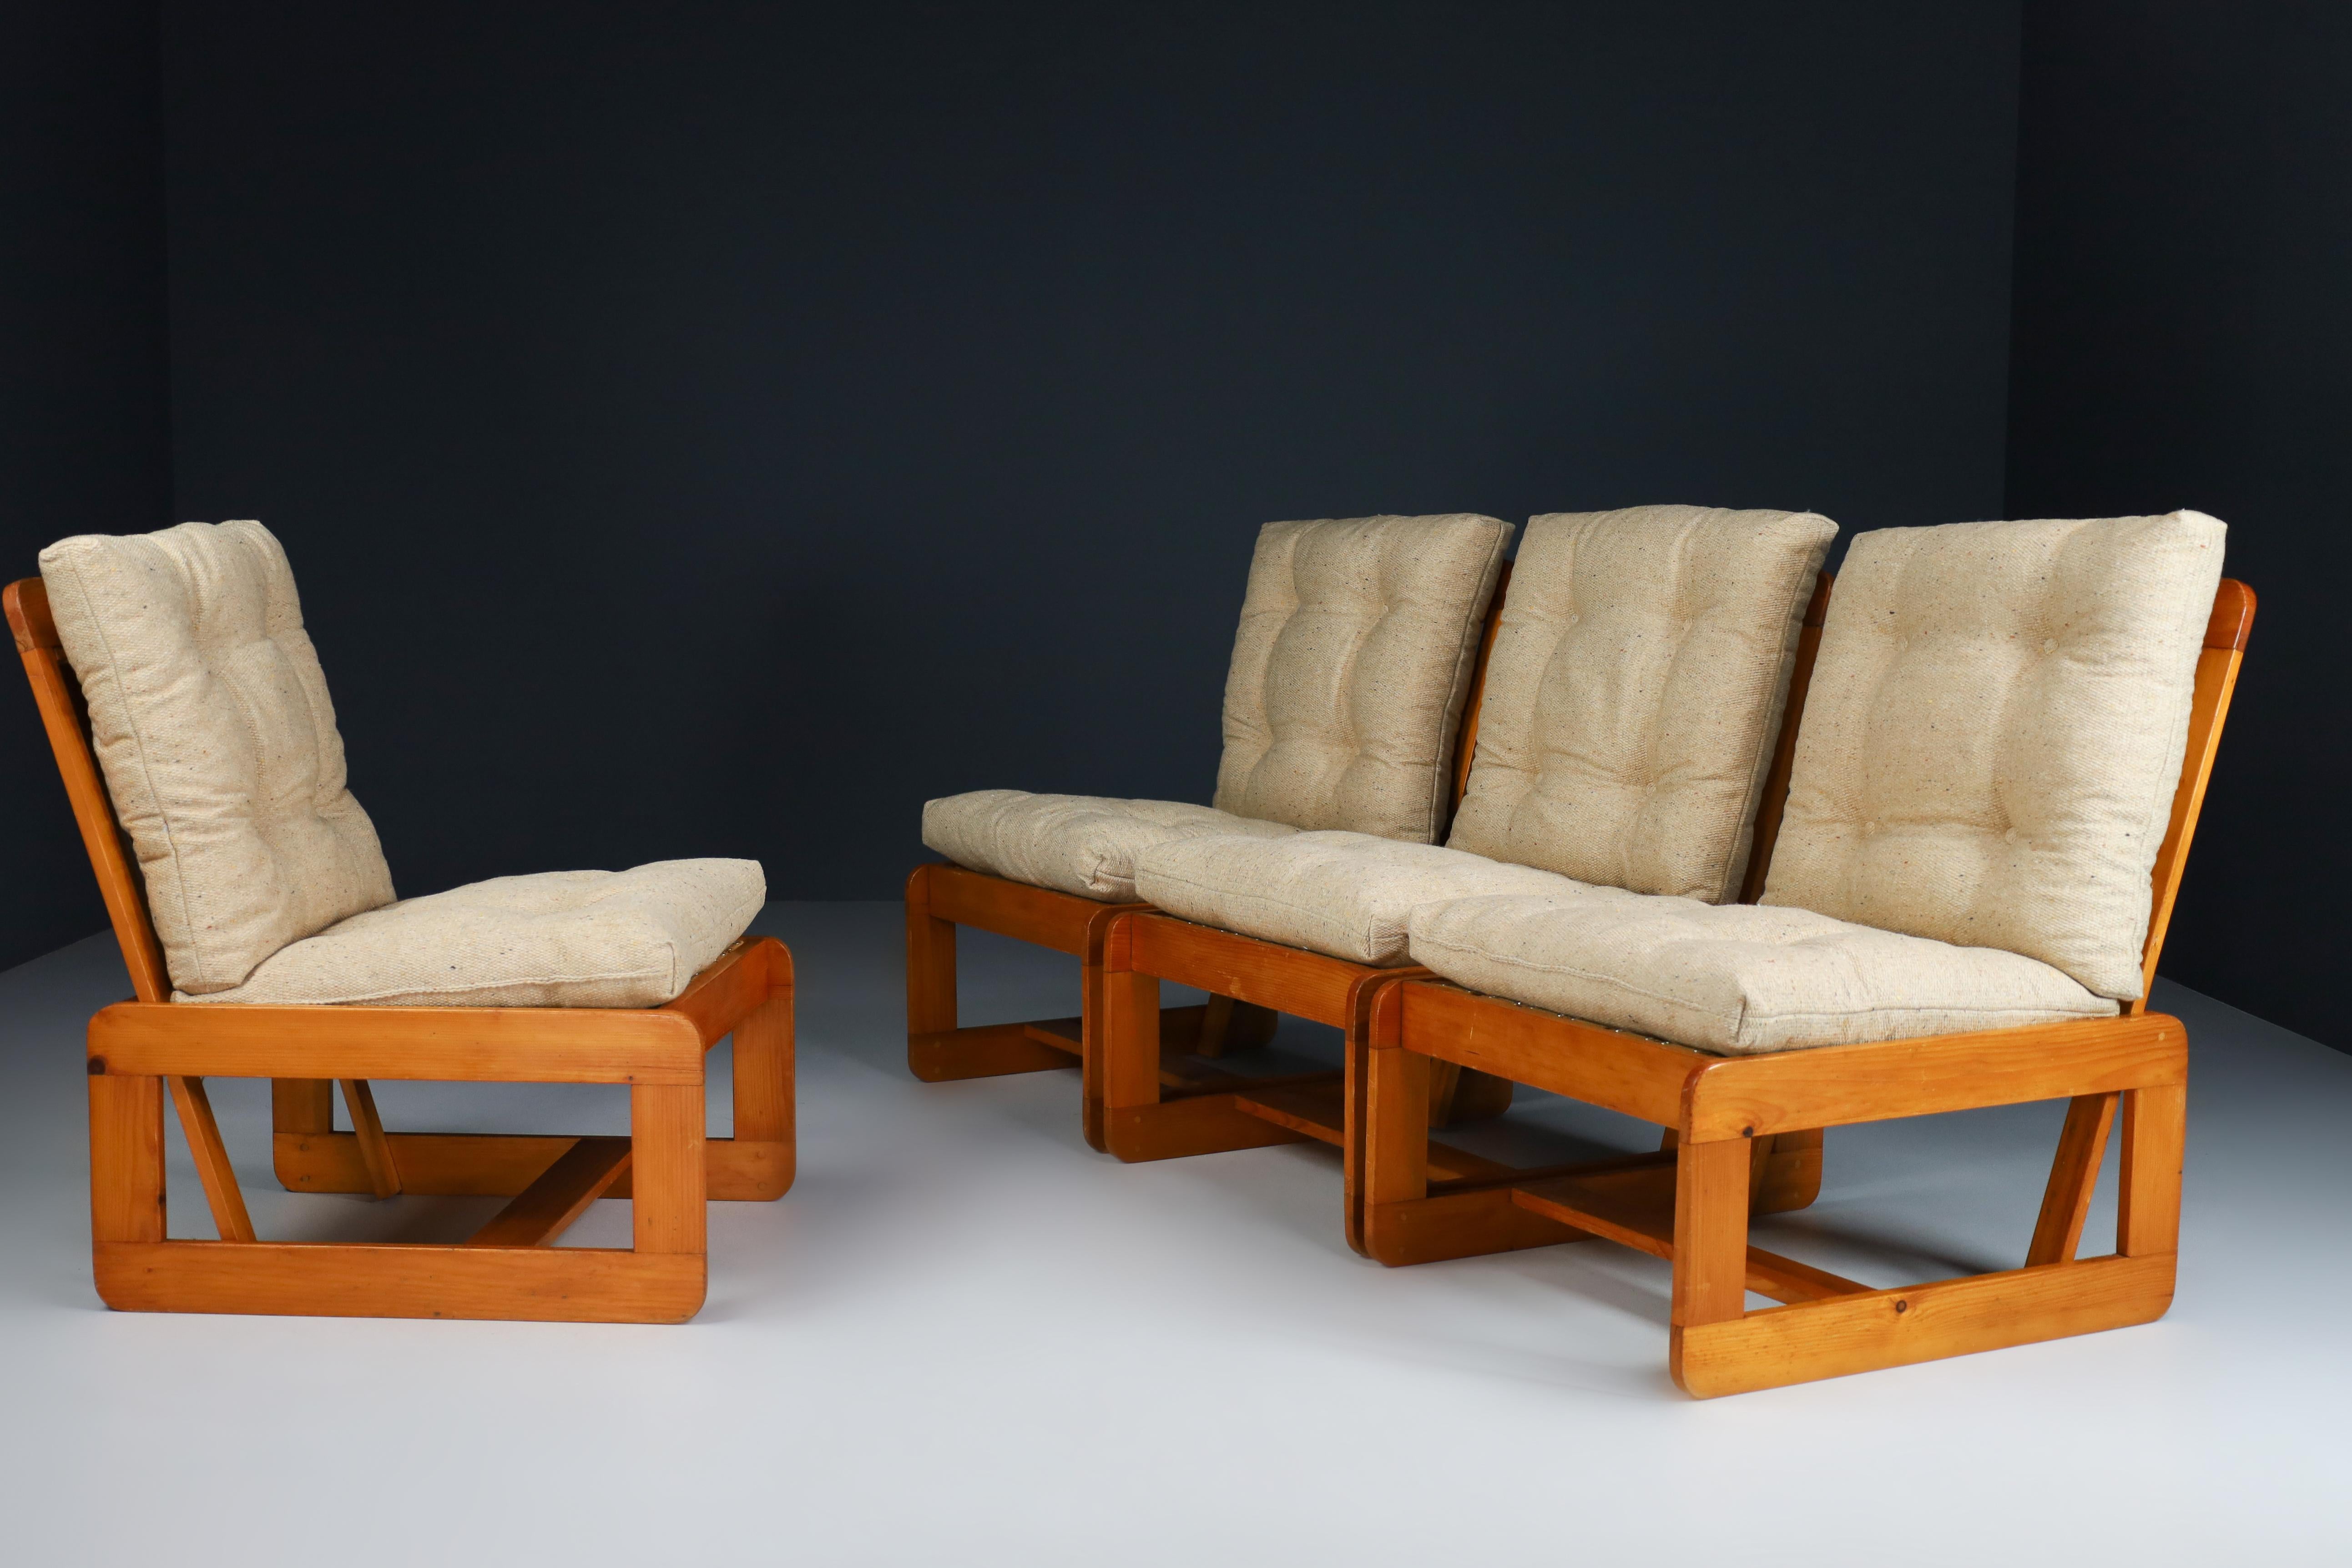 Four natural pinewood lounge chairs with original jute fabric were made in Italy in the 1970s. These solid pine chairs show a lovely natural patina, are in superb original condition and have a great patina and natural wear to the original jute